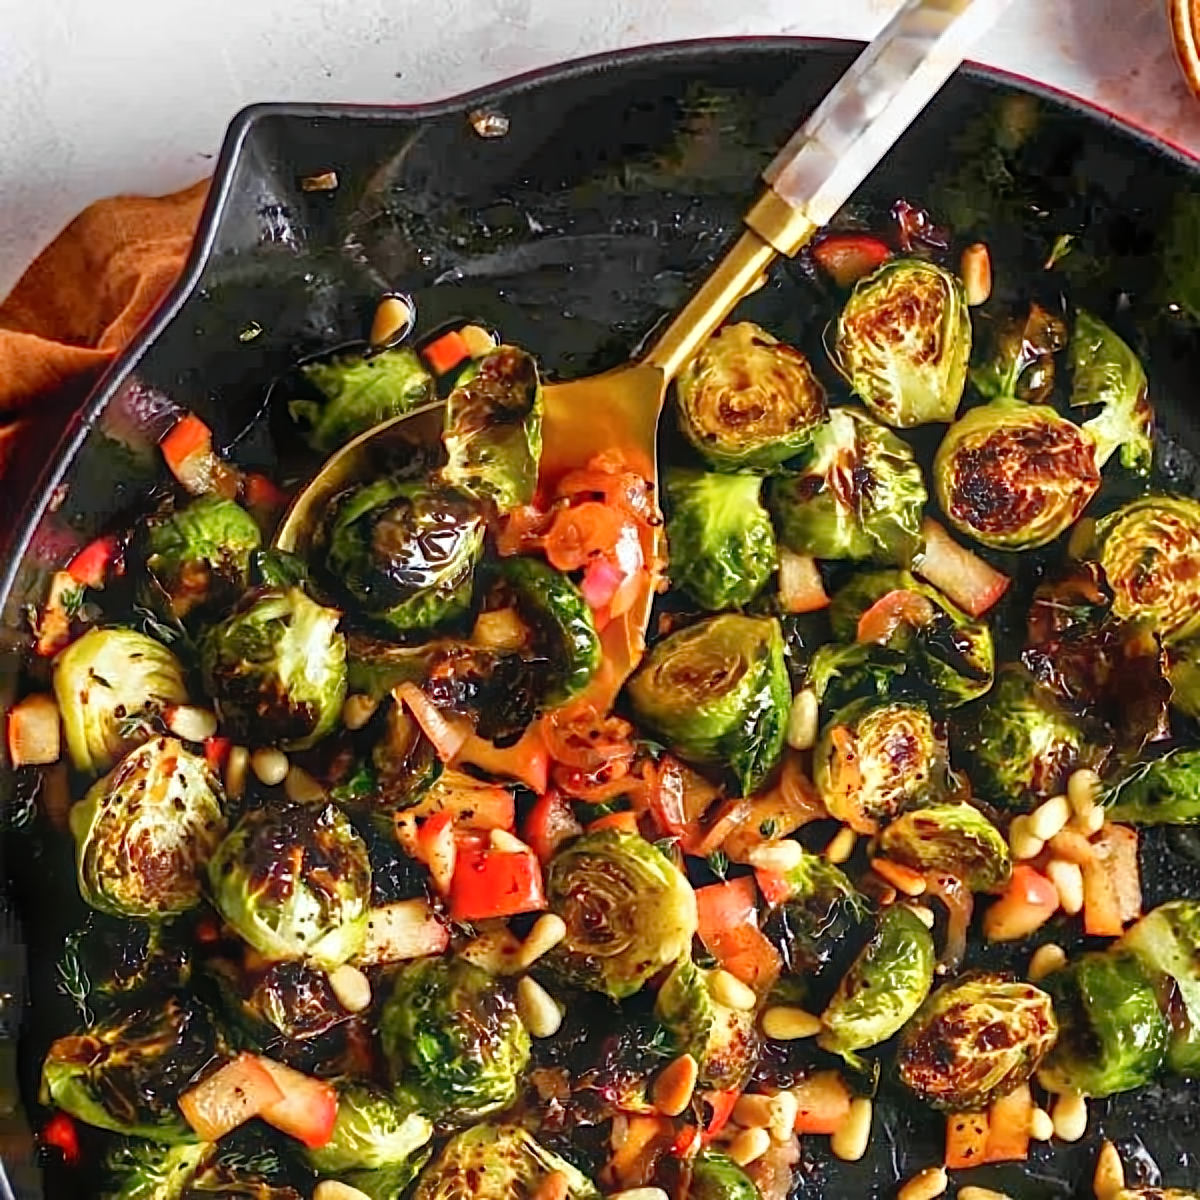 17. Cider-Glazed Brussels Sprouts - easy brussel sprouts recipe